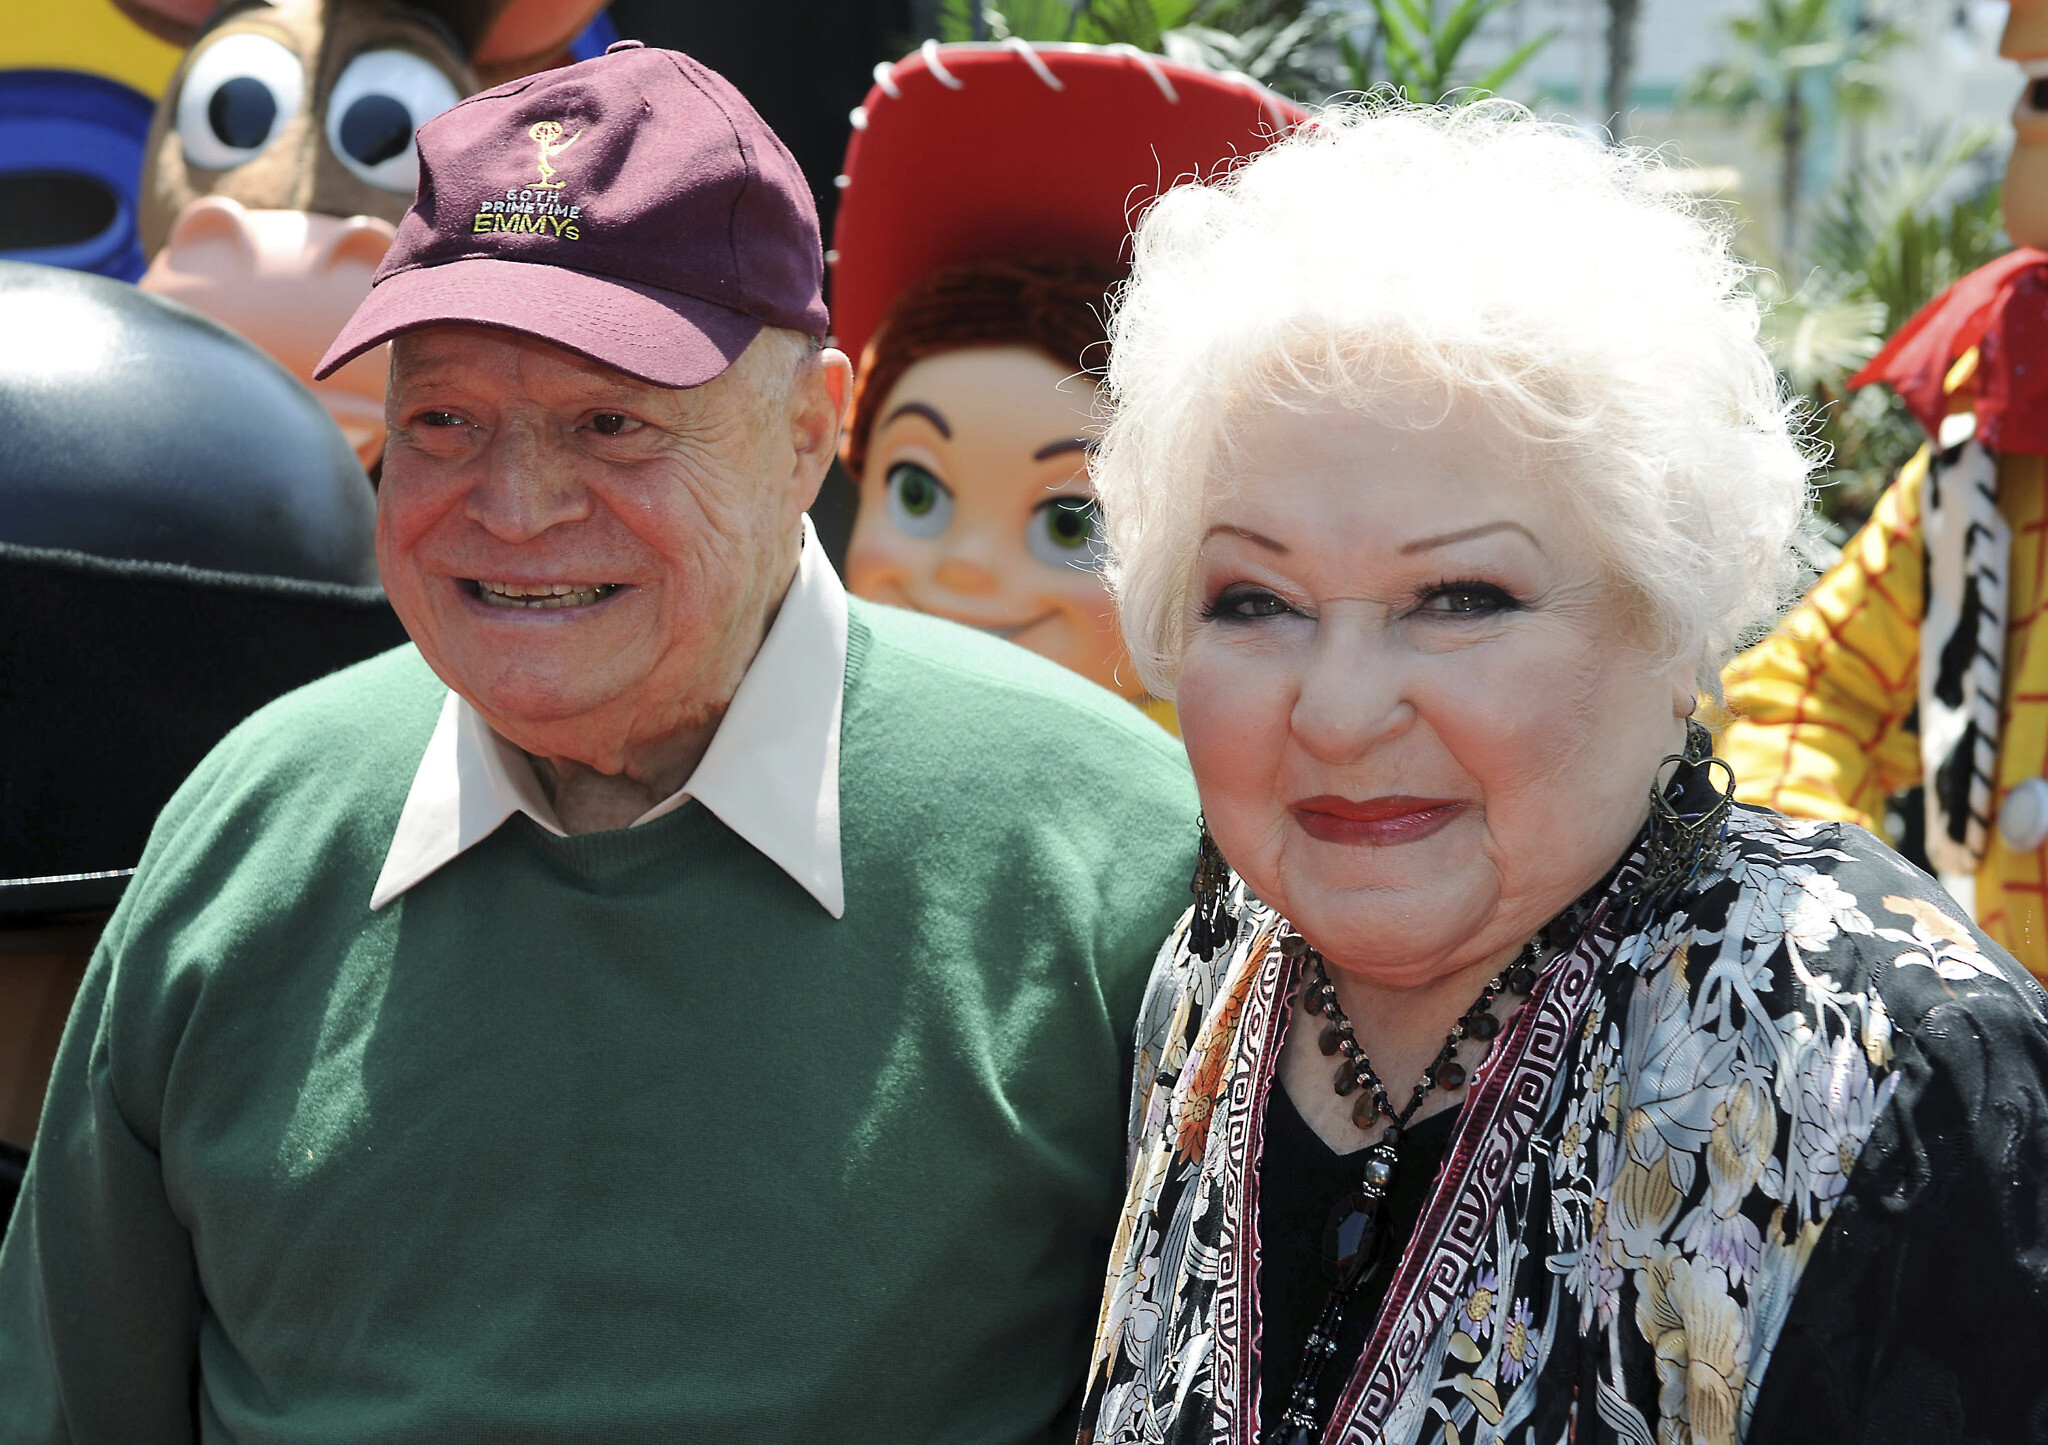 Estelle Harris, Mrs. Potato Head from “Toy Story”, Passes Away at 93